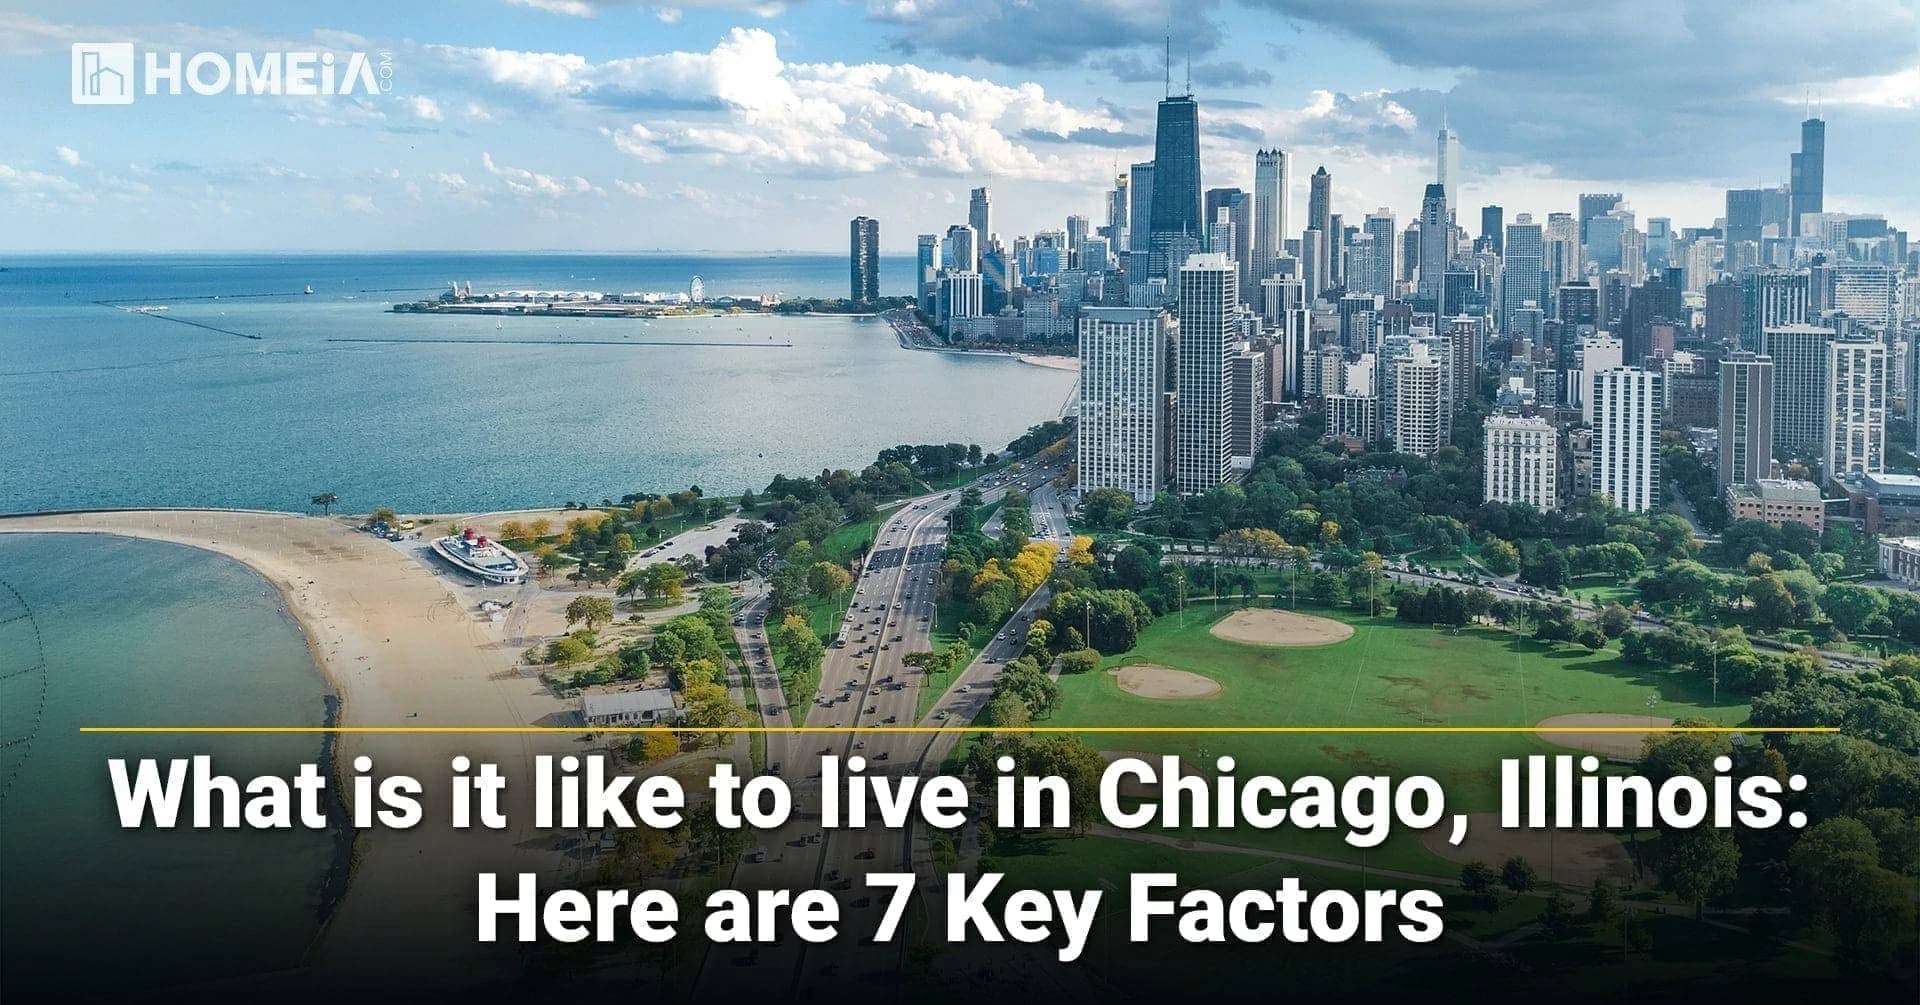 7 Key Factors to Know About Living in Chicago, Illinois